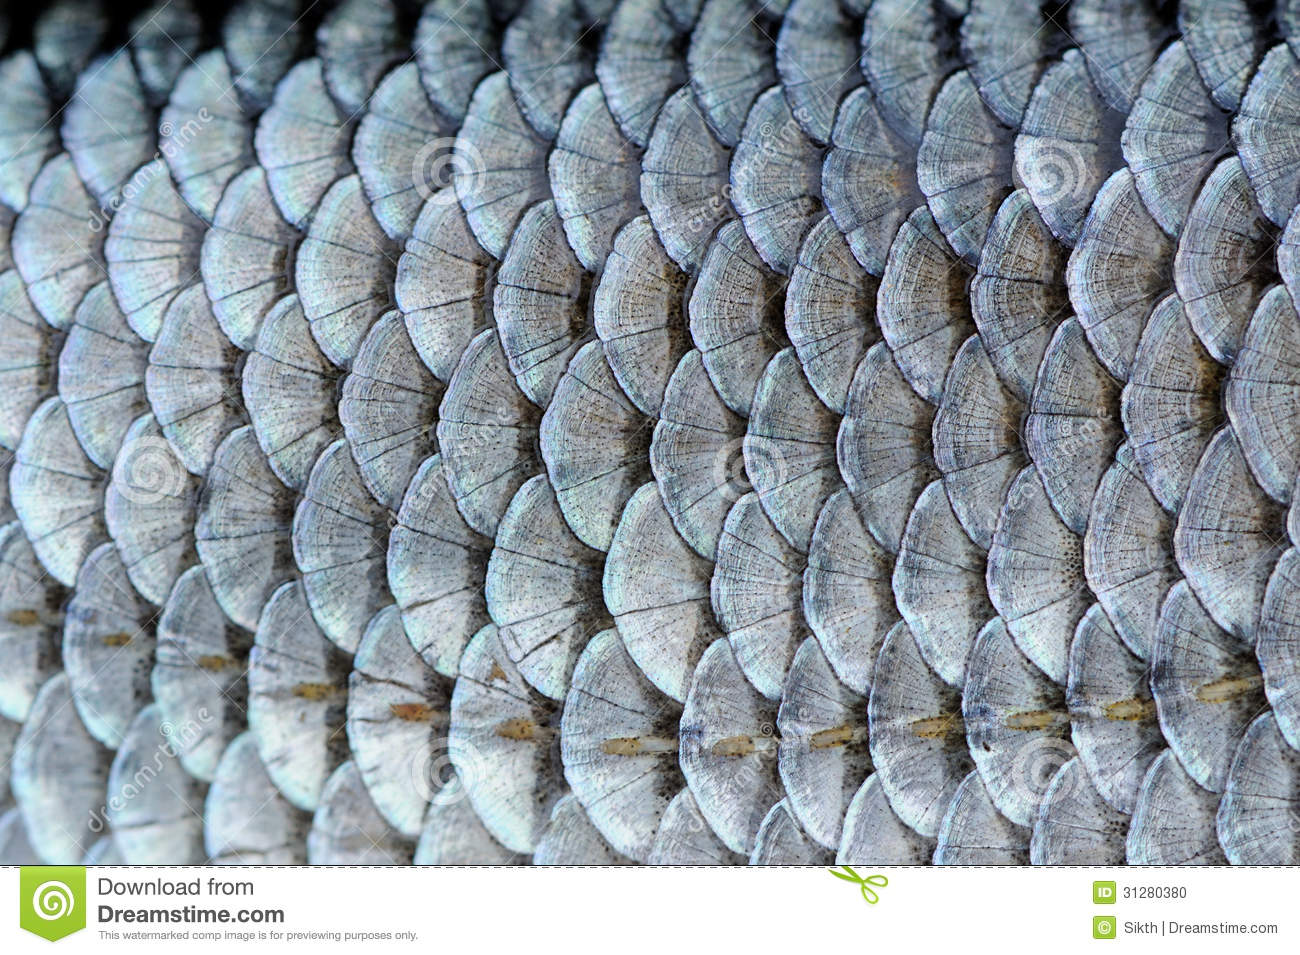 Real Roach Fish Scales Background Stock Photo   Image  31280380